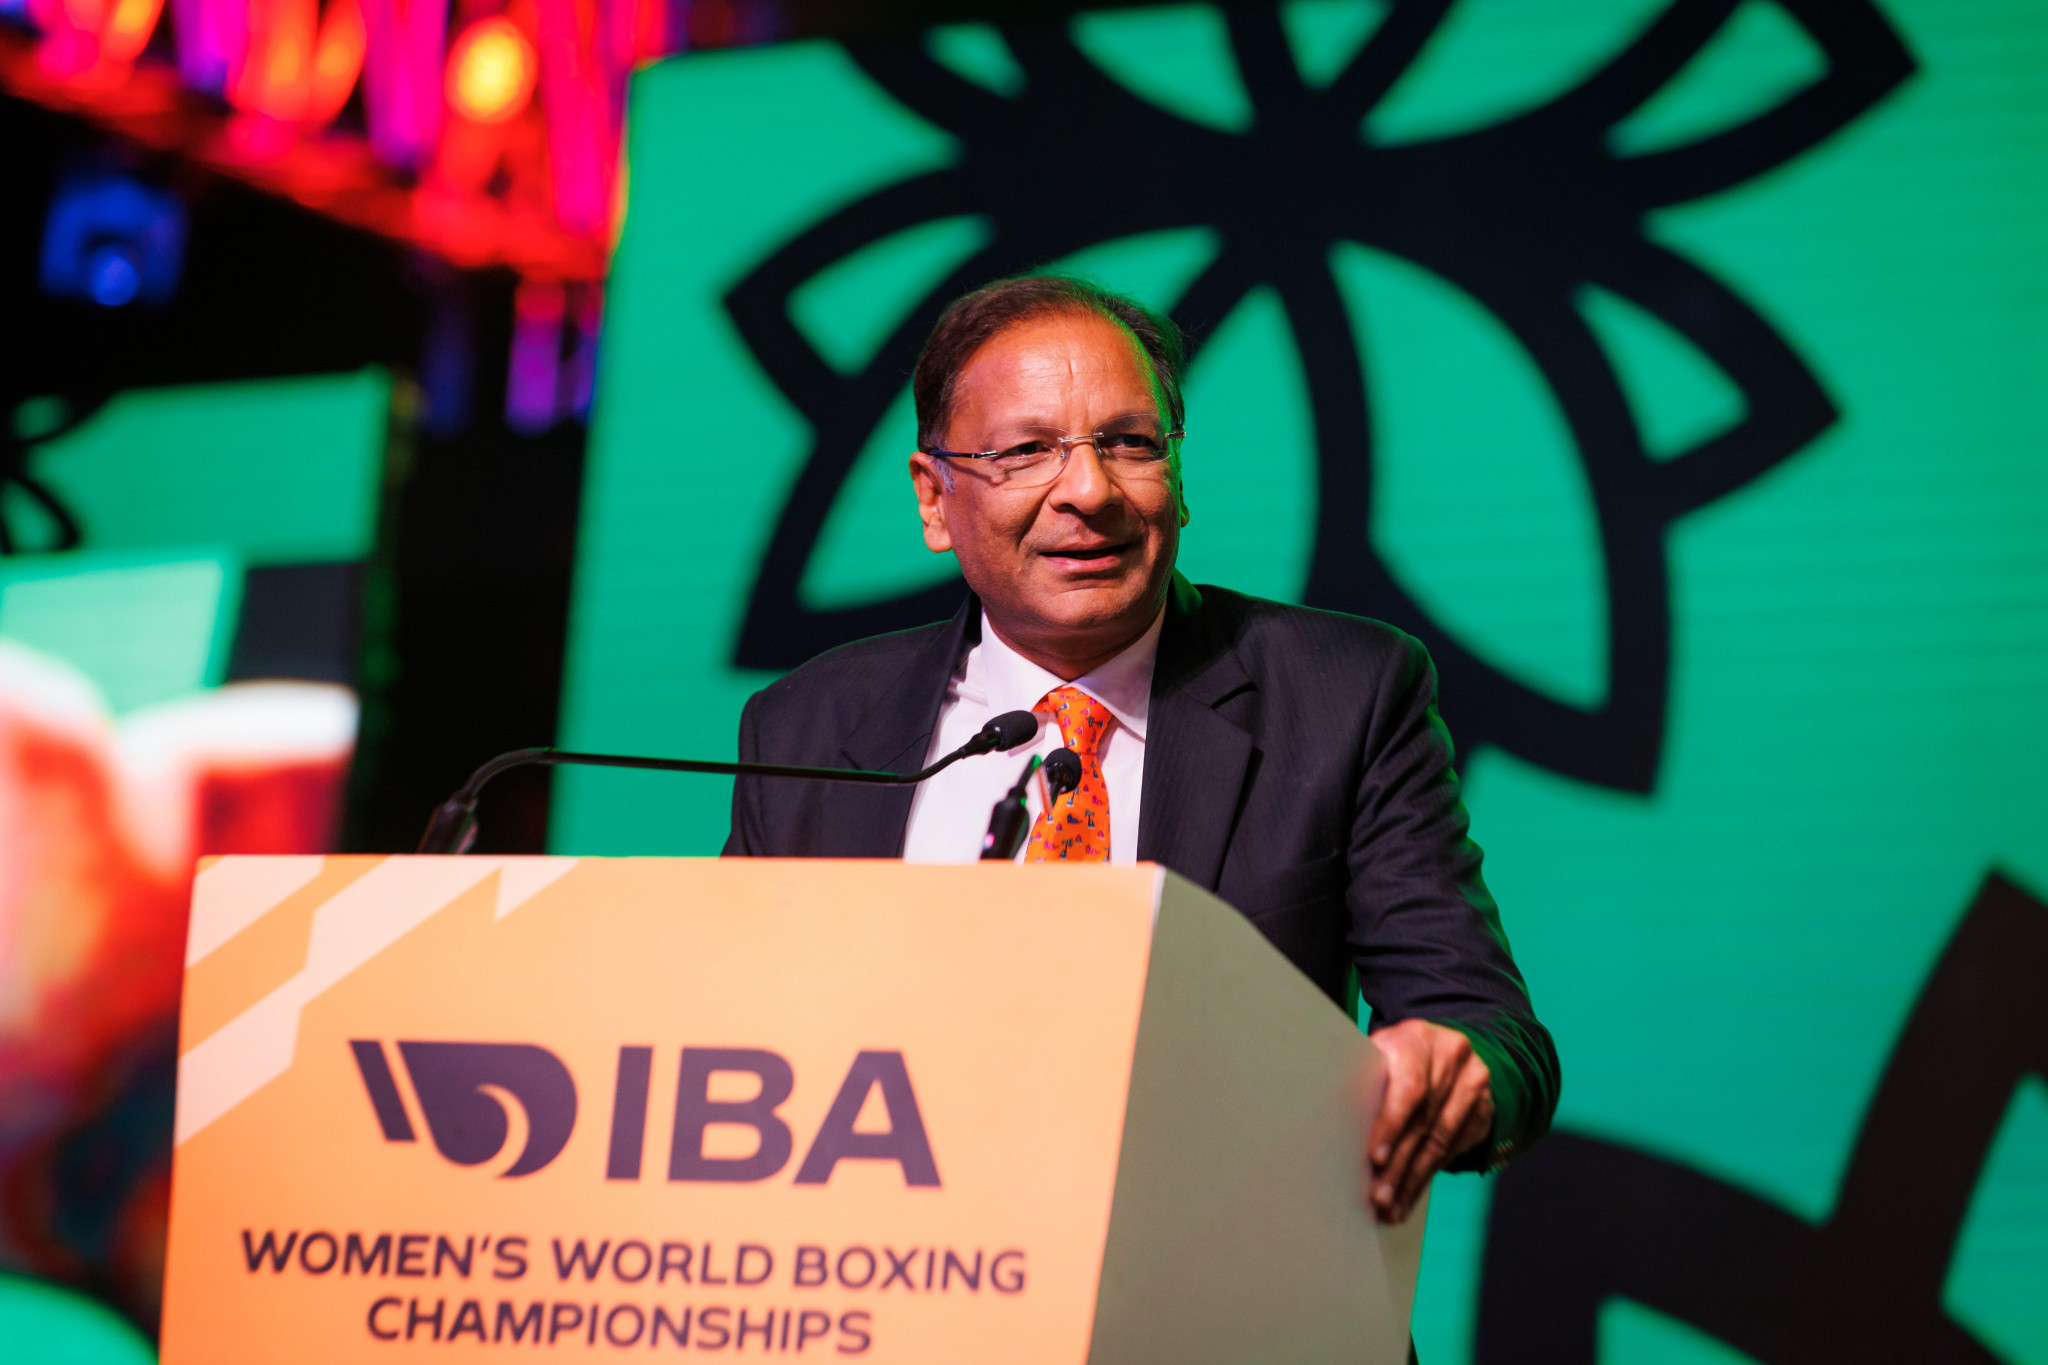 Exclusive: India in talks with IBA over hosting future Men’s World Championships